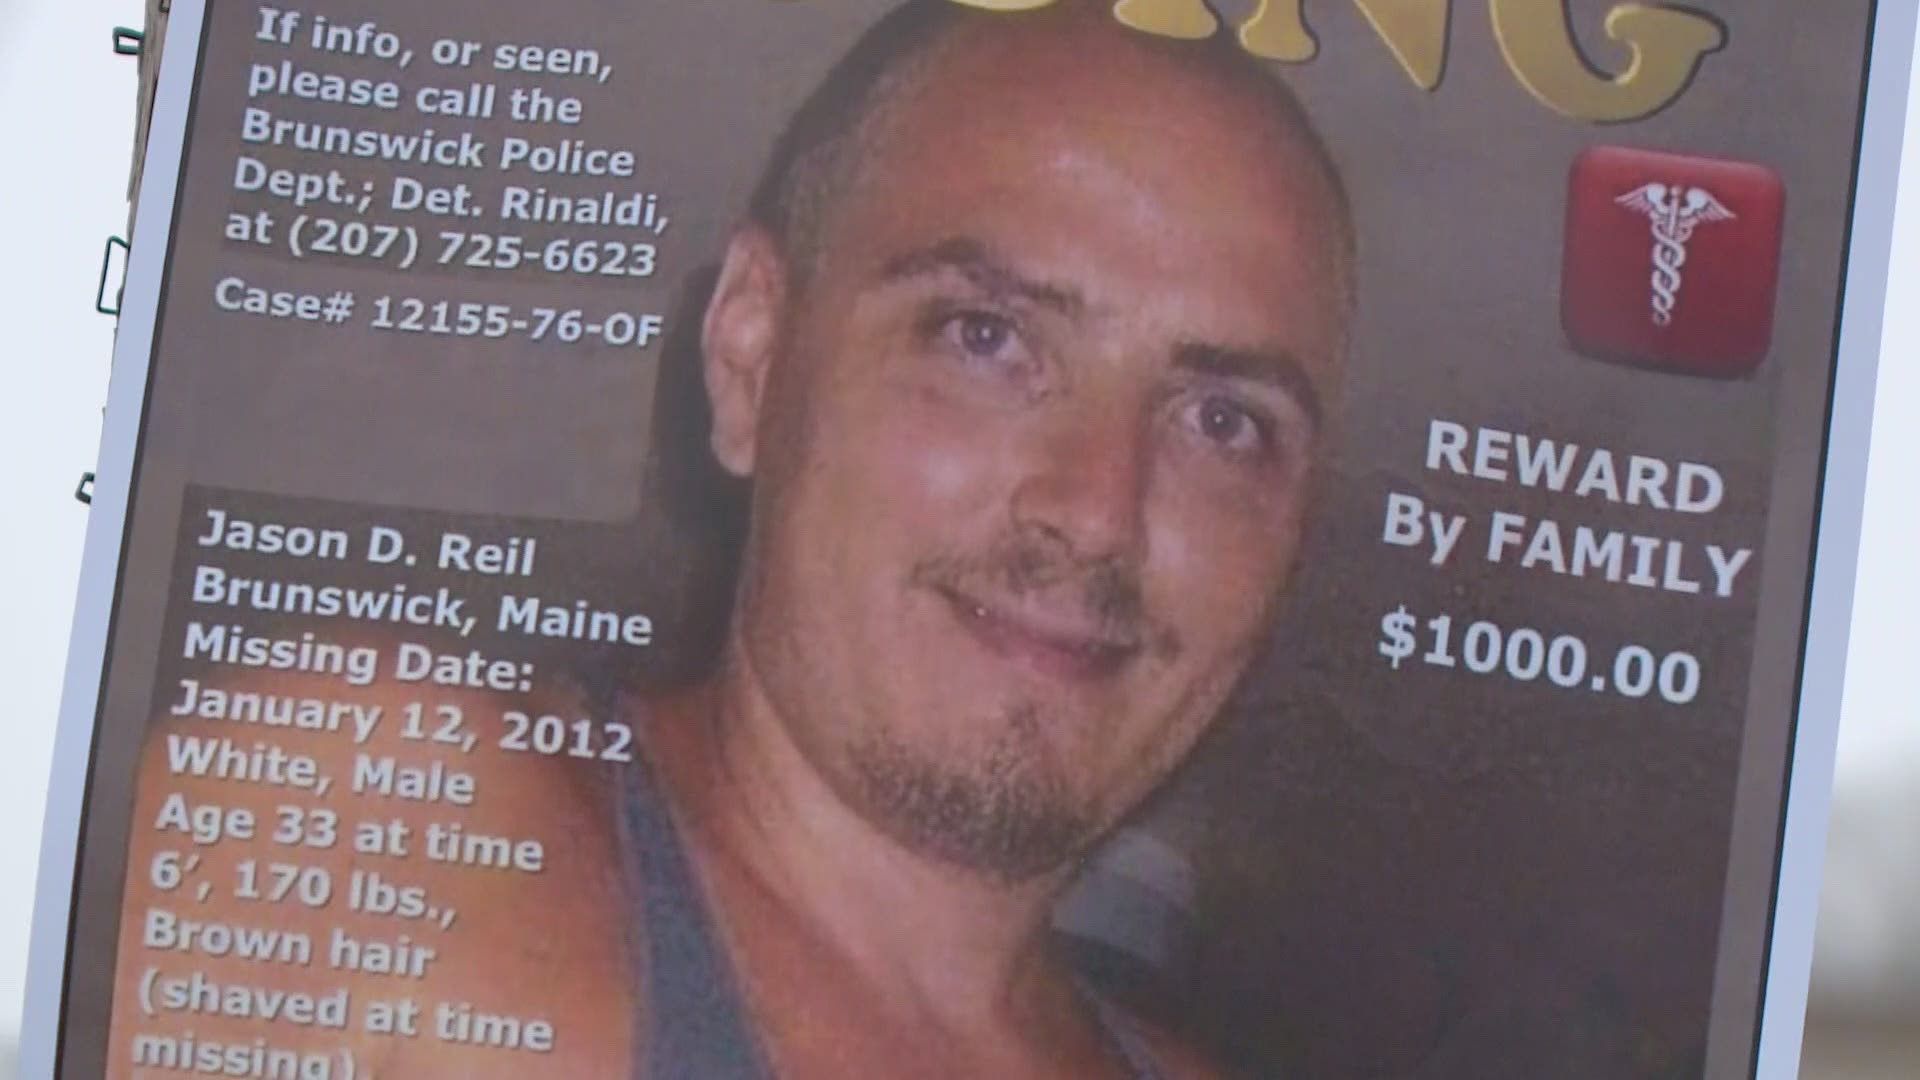 Jason Reil has been missing since he disappeared after a trip to the drug store in January of 2012. His family is hoping a larger reward may bring new info to light.